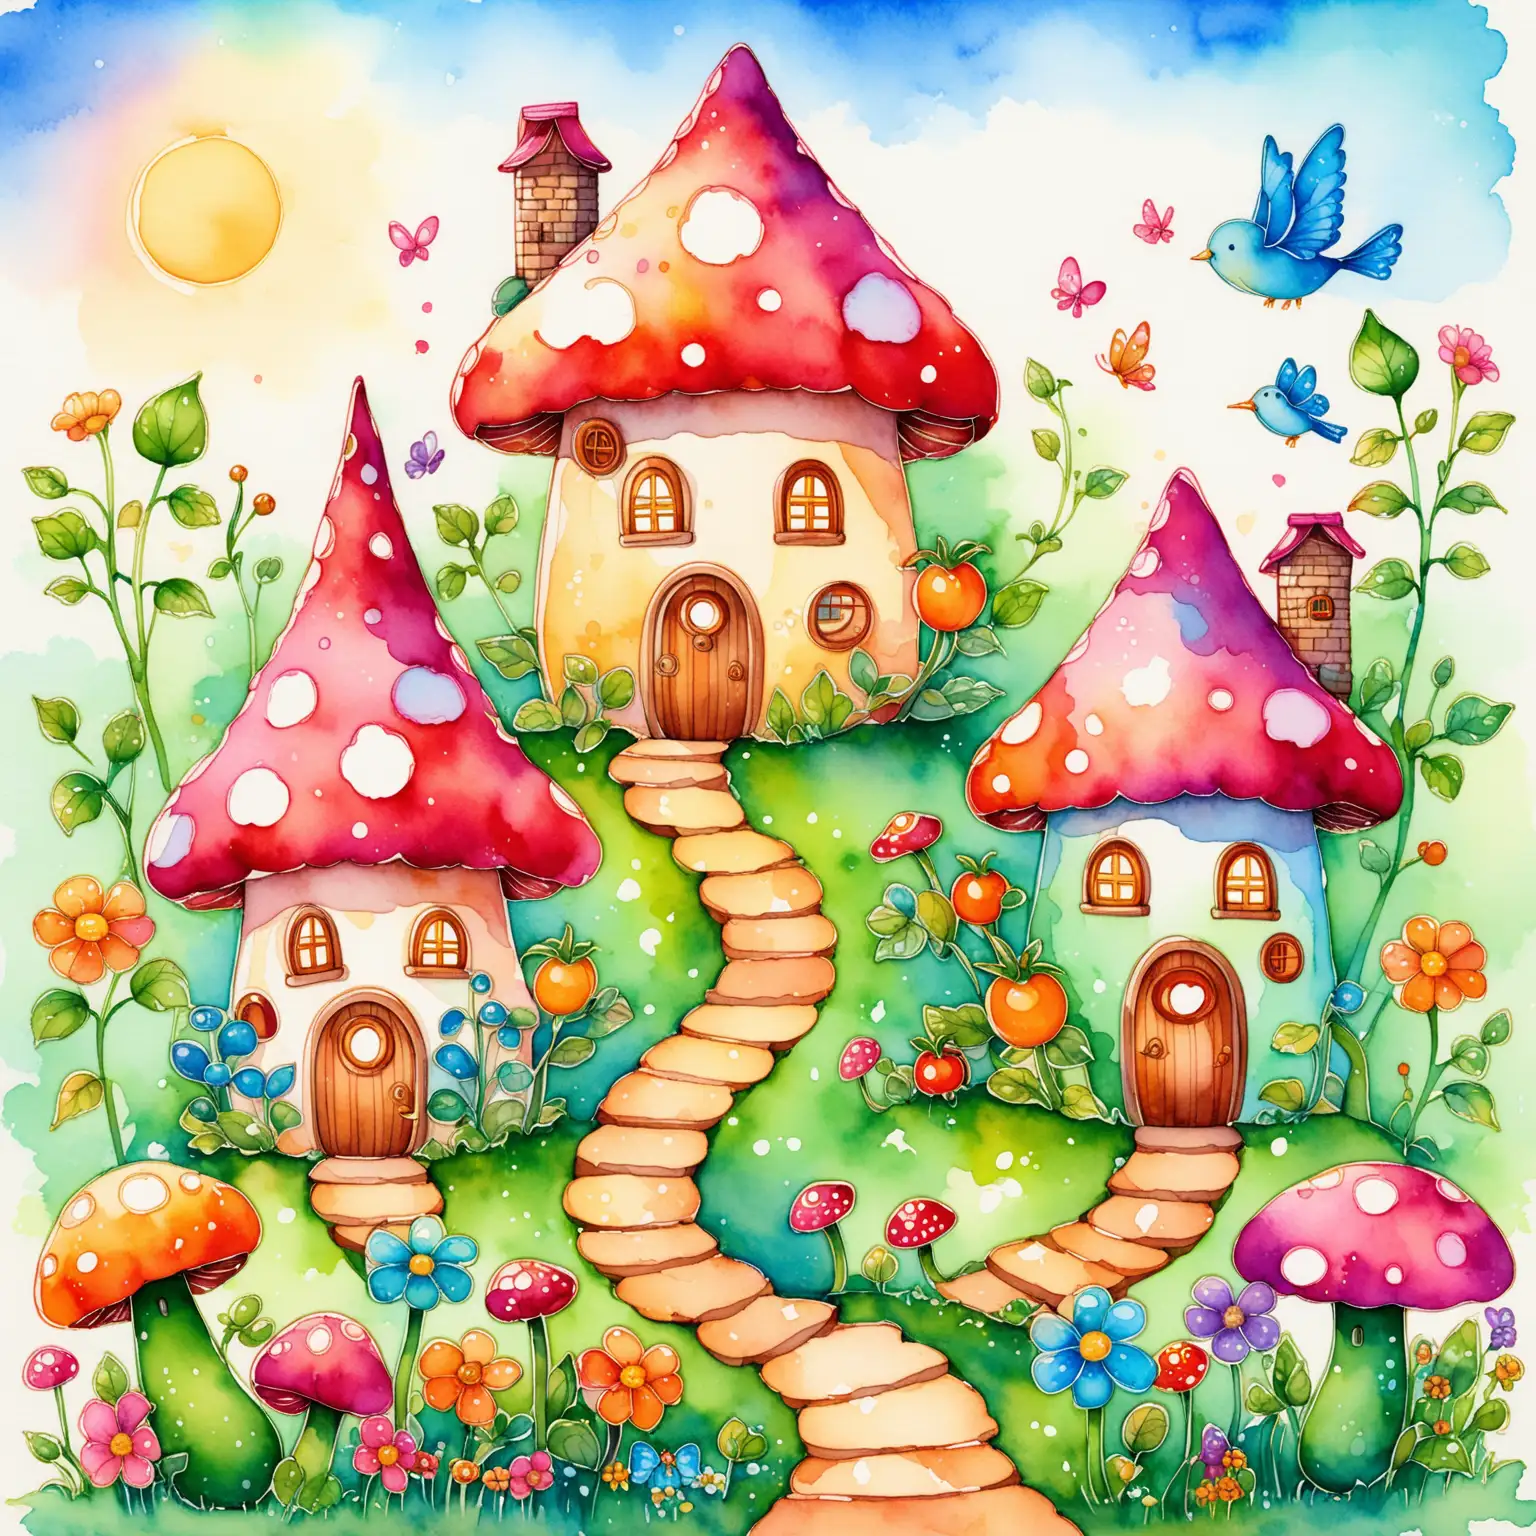 Whimsical Garden Houses with Cartoon Animals and Sunny Day Scene